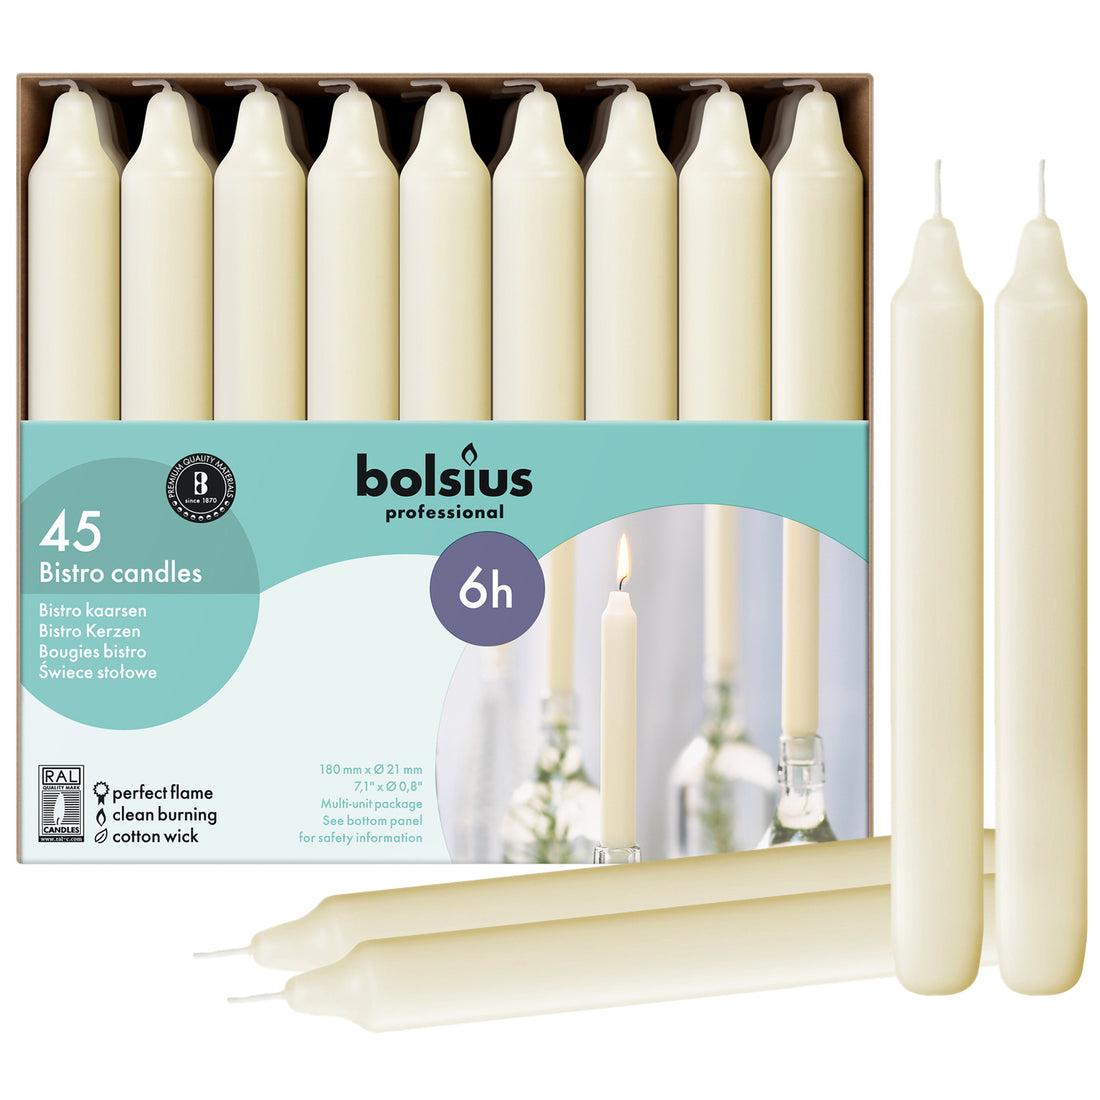 7" X 0.8" Classic Houshold Taper Candles - 45 Pack - Kisco Candles